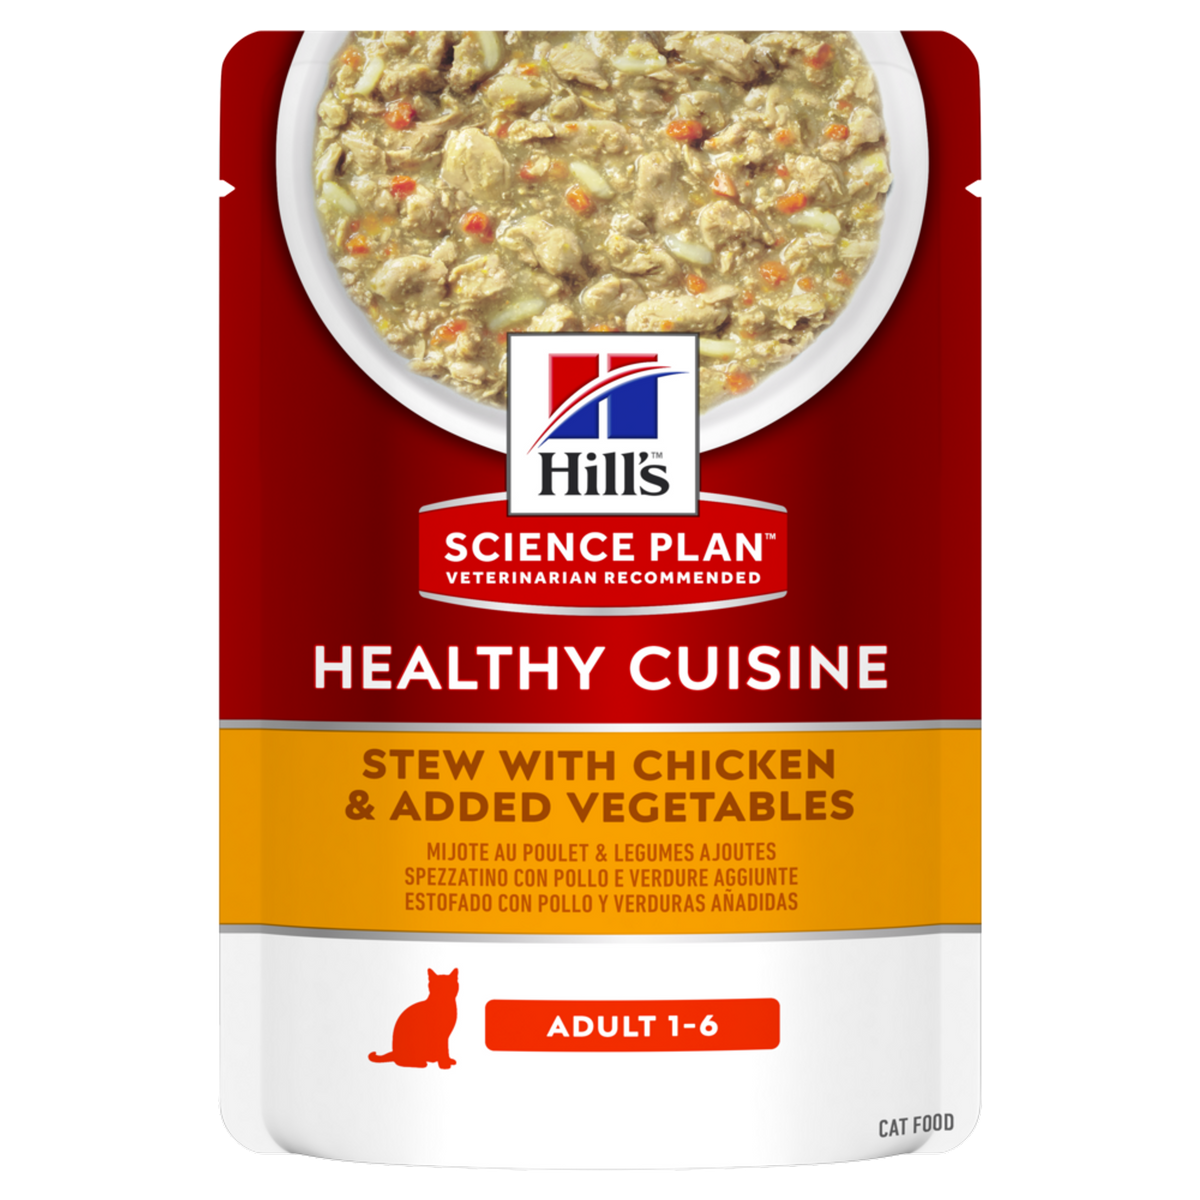 Hill’s SCIENCE PLAN HEALTHY CUISINE Adult Cat Stew With Chicken & Added Vegetables - 12 Pouches